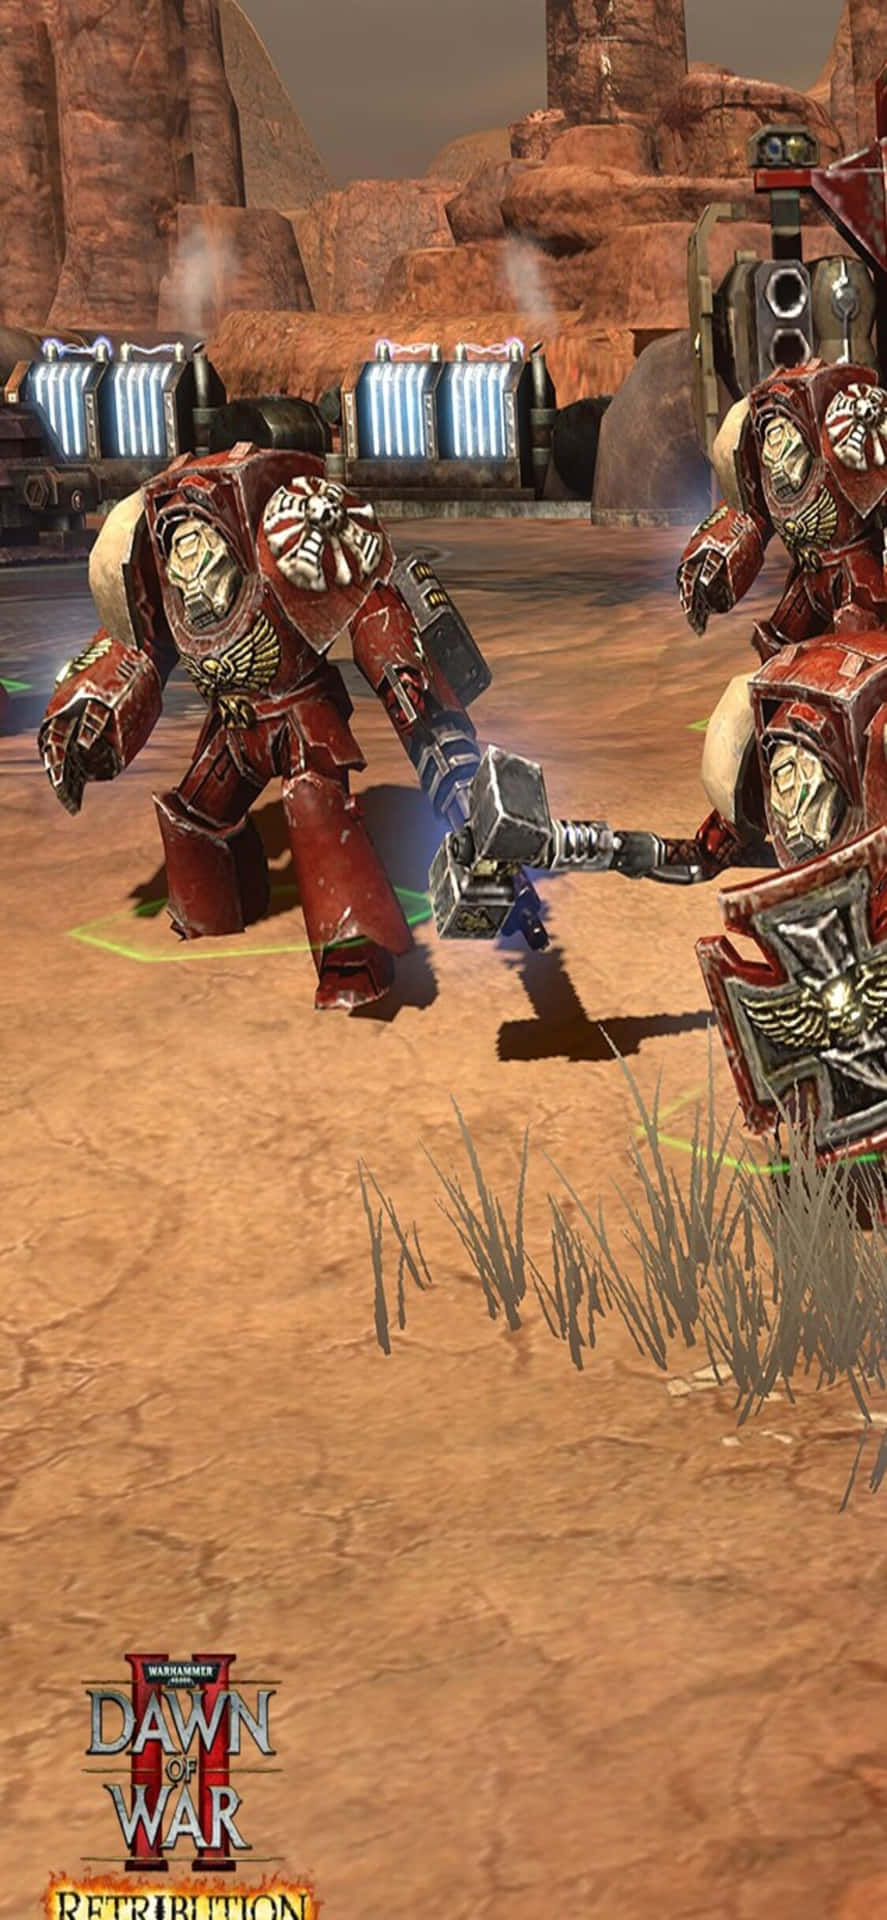 Prepare Yourself for Epic Battles and Conquer the Galaxy with Dawn of War III